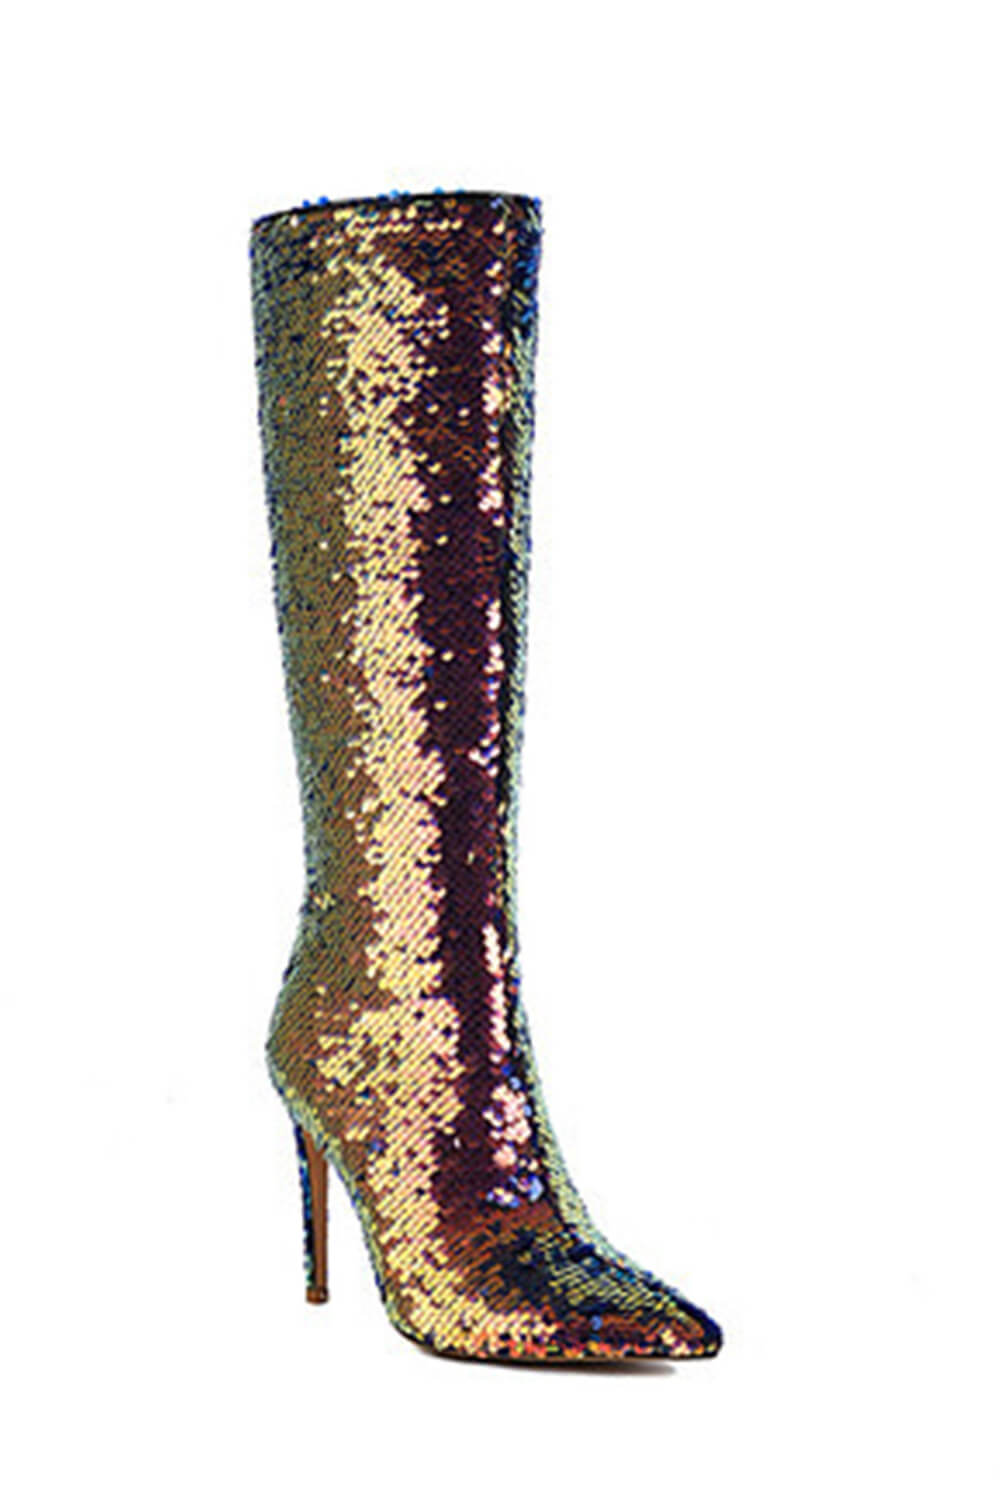 Sequin Pointed Toe Stiletto Heel Knee High Long Boot - Green/Black/Sil ...